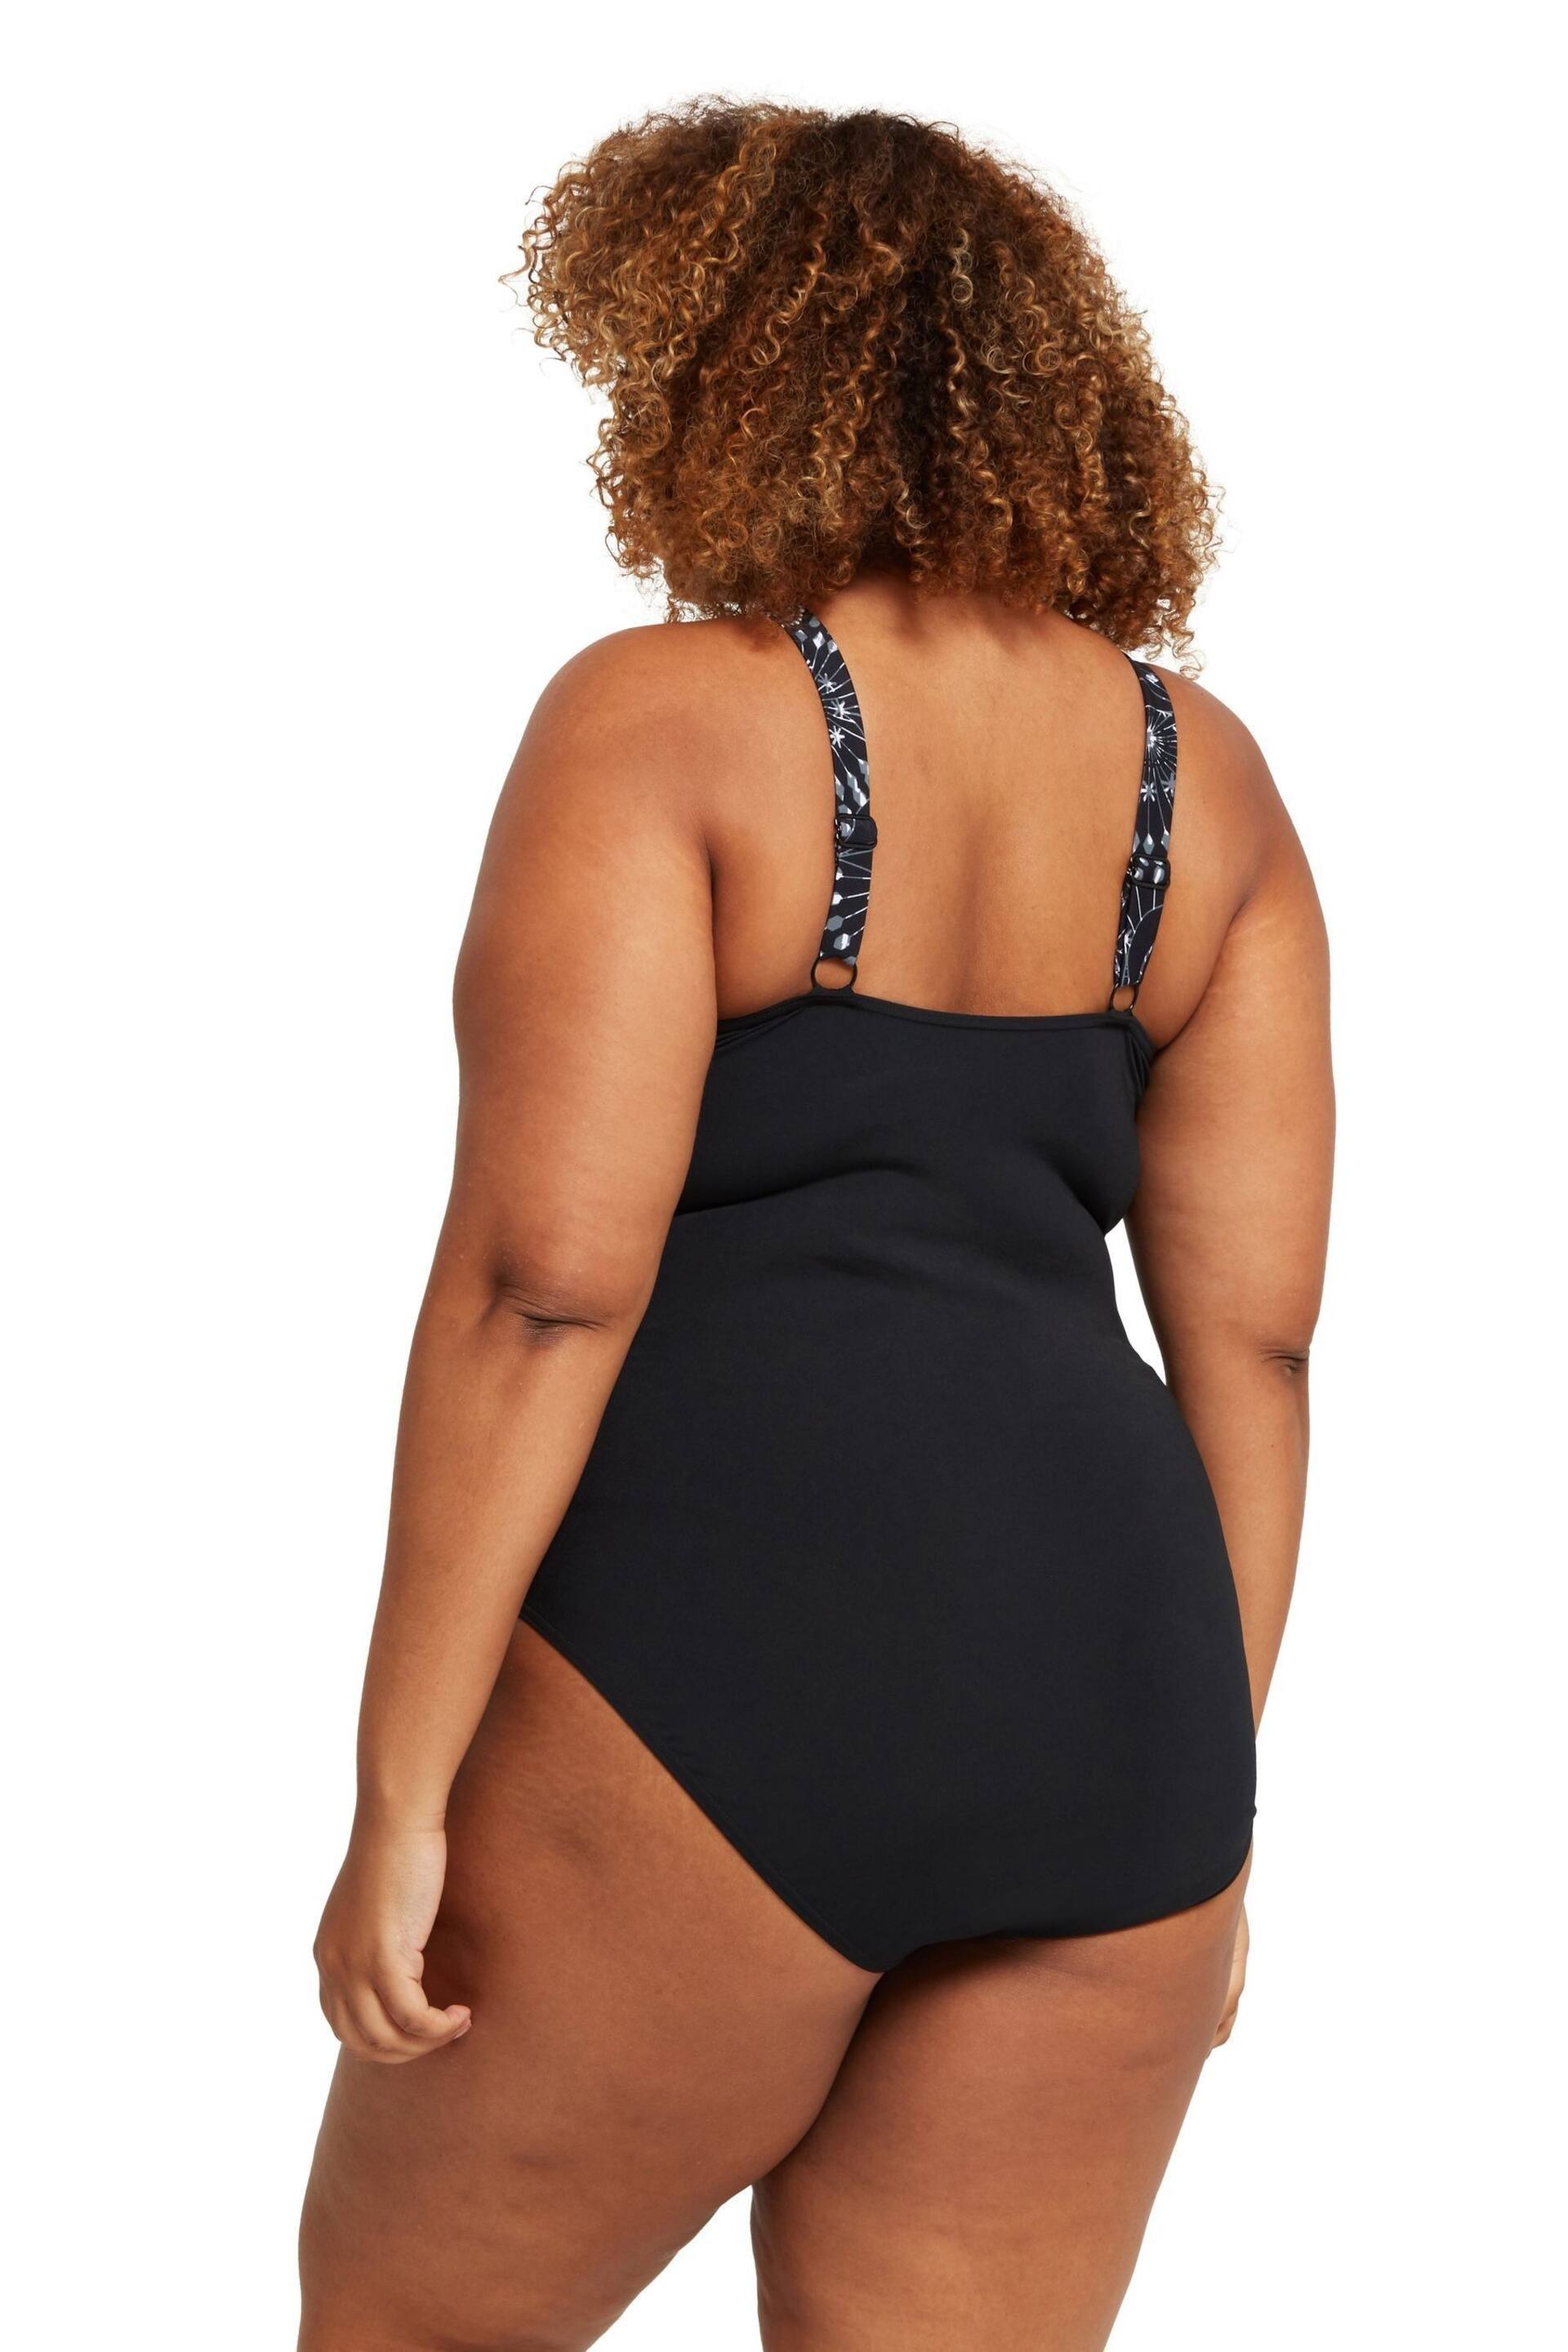 Zoggs Adjustable Classicback One Piece Swimsuit with Foam Cup Support - Image 4 of 8